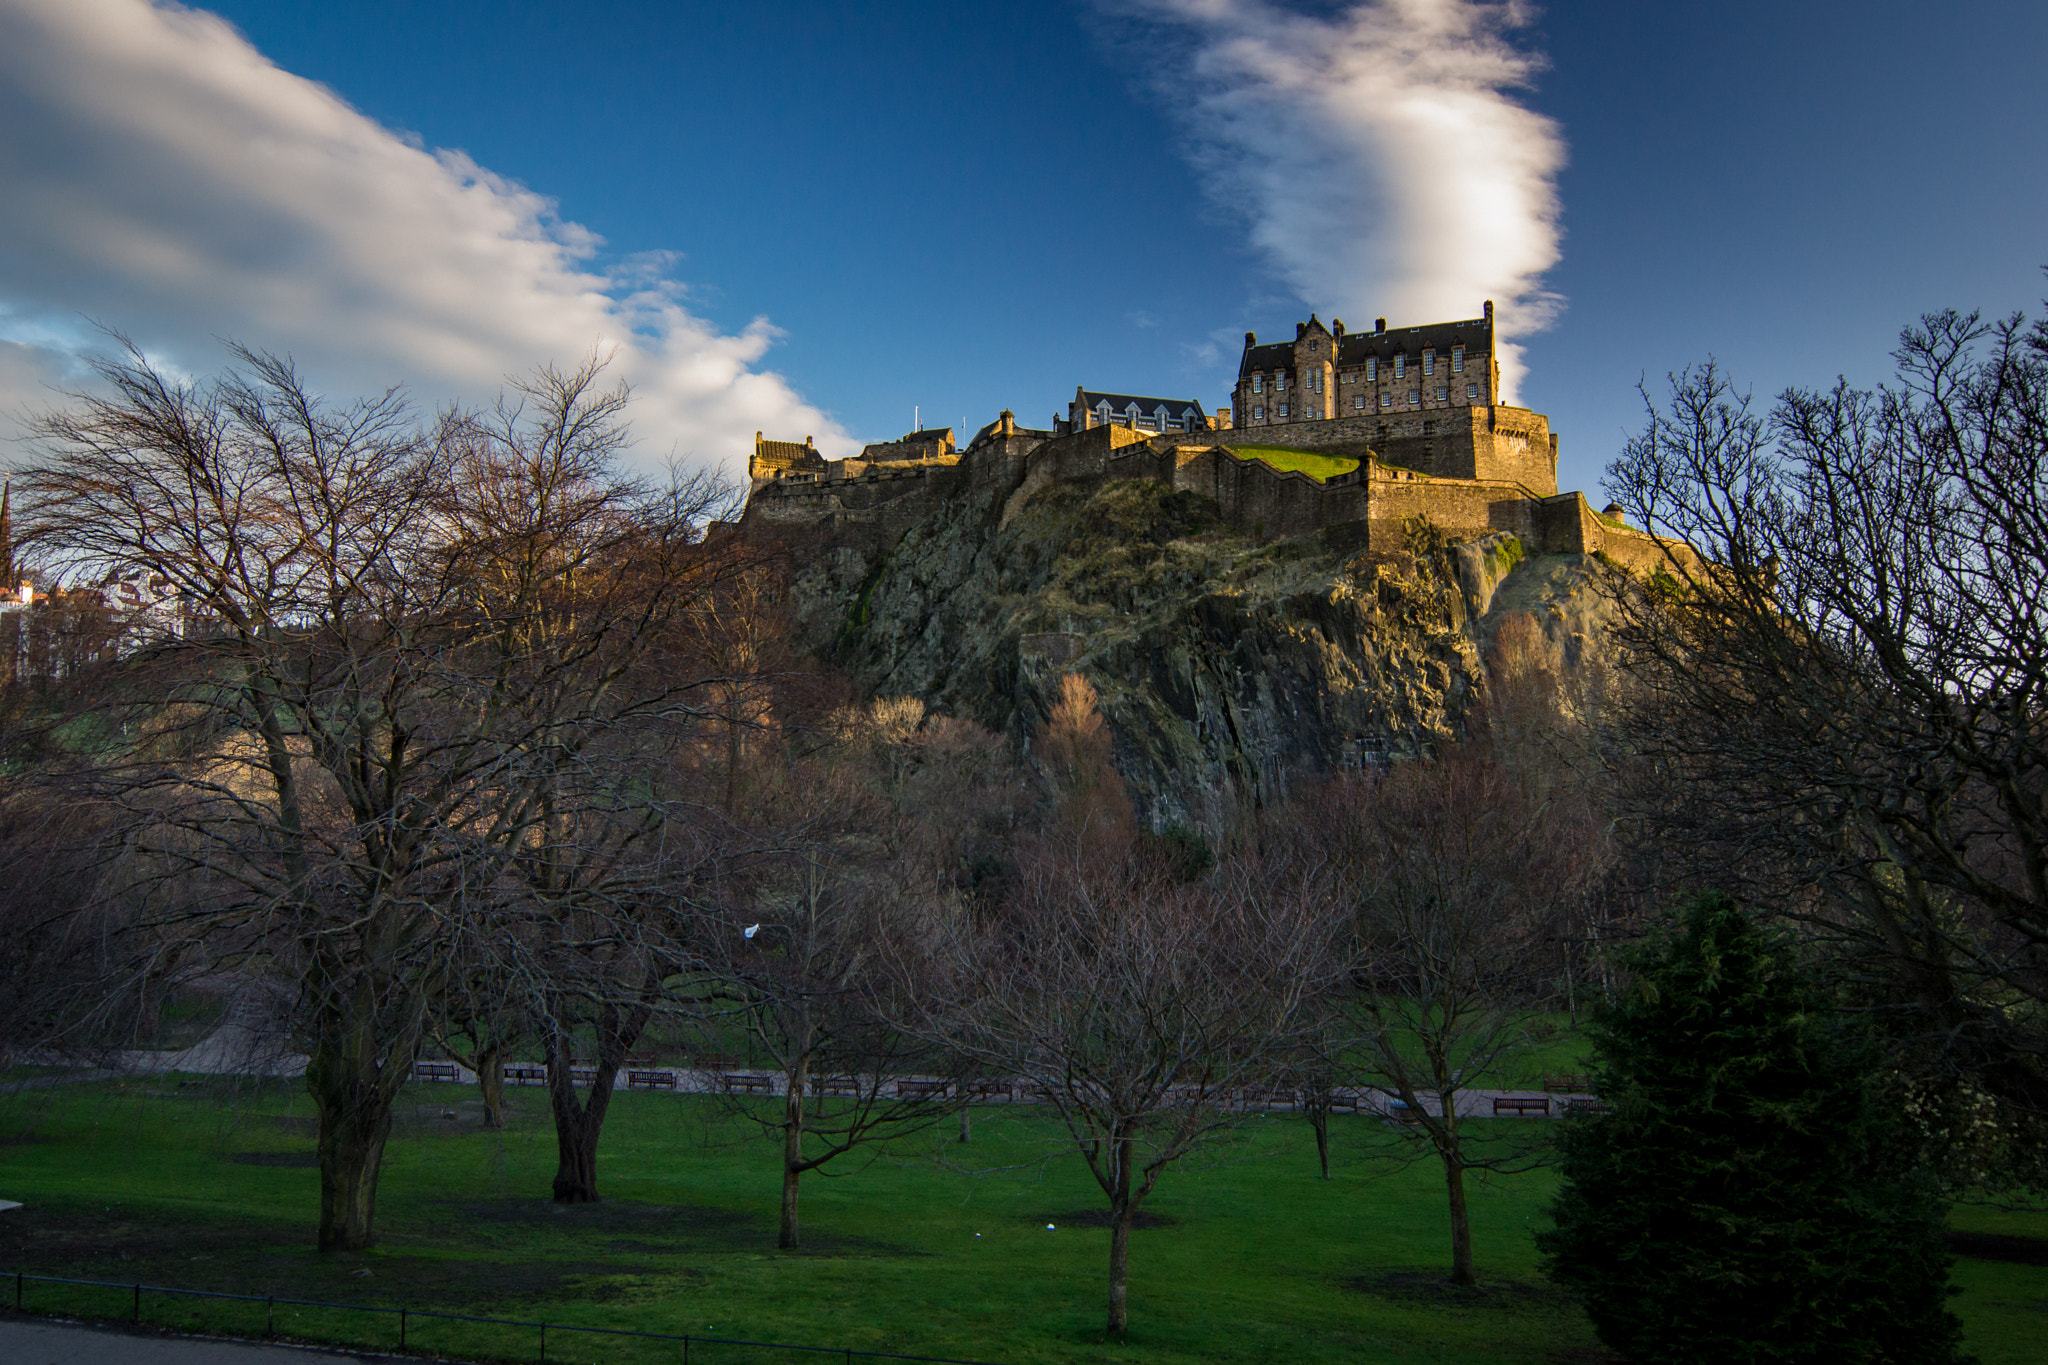 20mm F2.8 sample photo. The castle photography